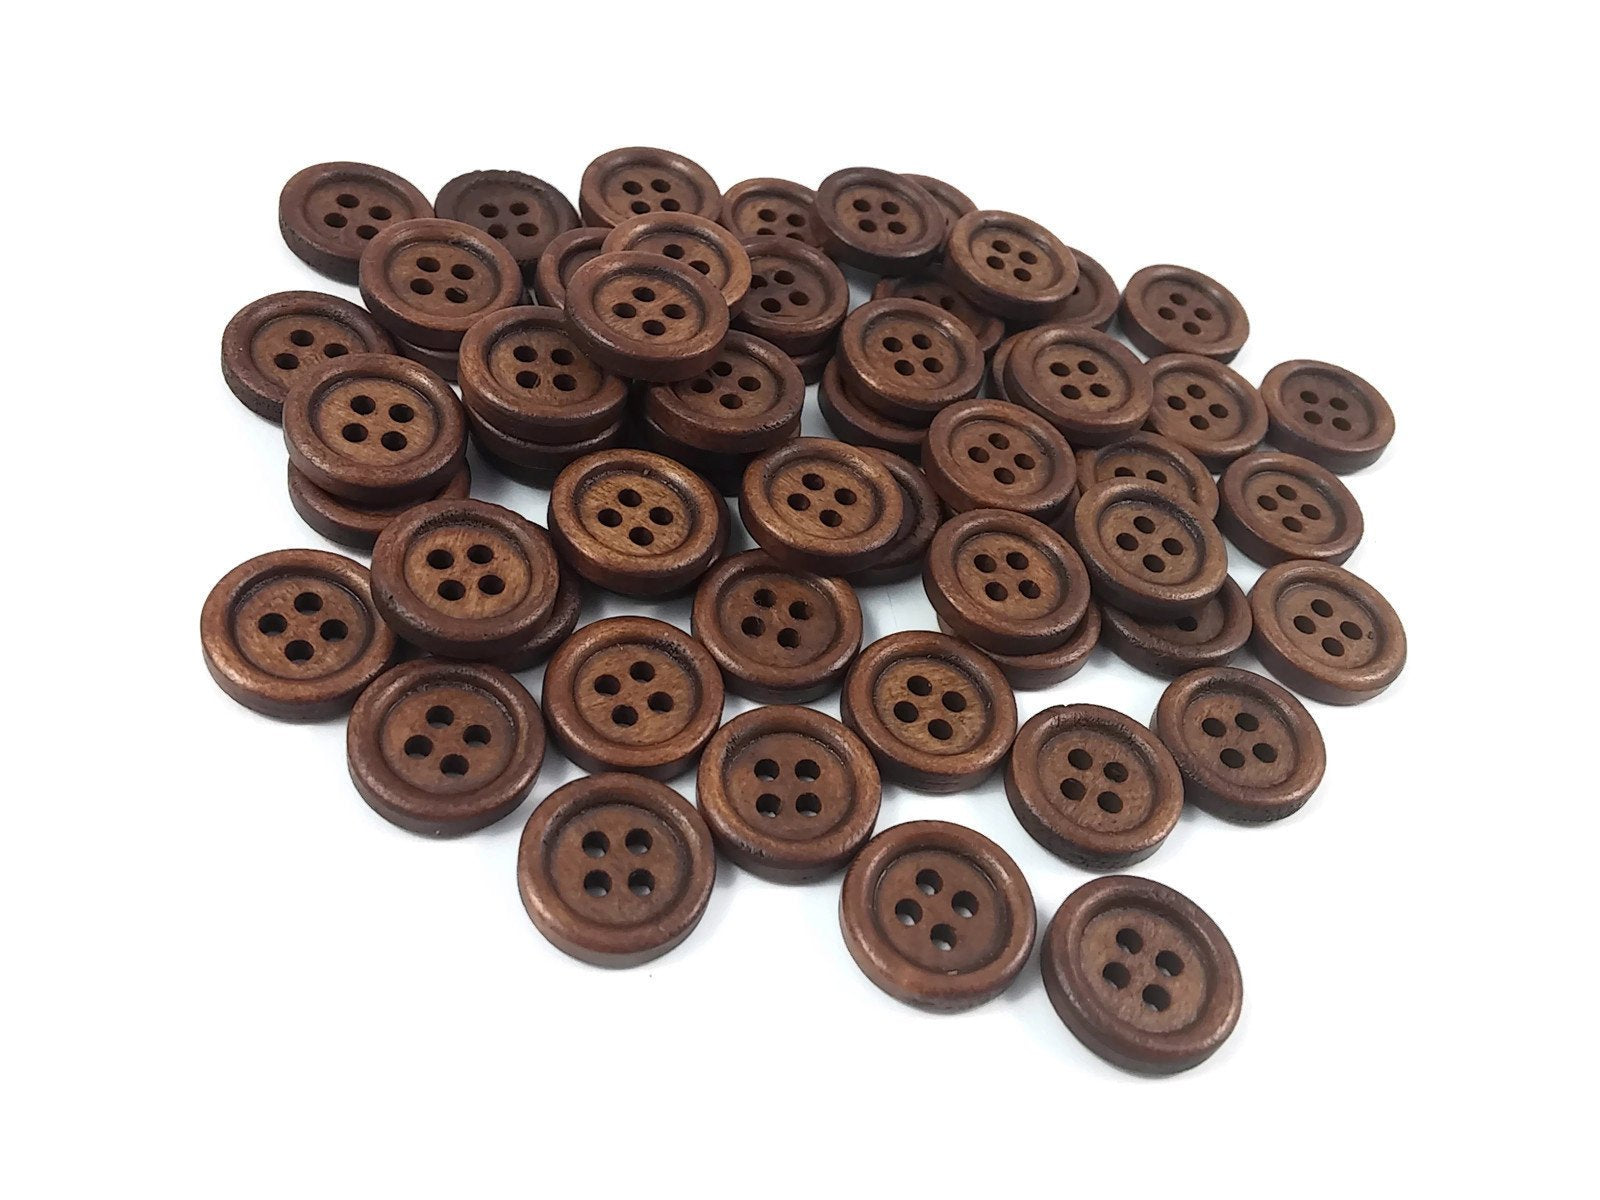 100Pcs Wood Buttons Sewing 2 Holes Round Brown Clothing Accessories 13 15mm  Light Brown 13mm 